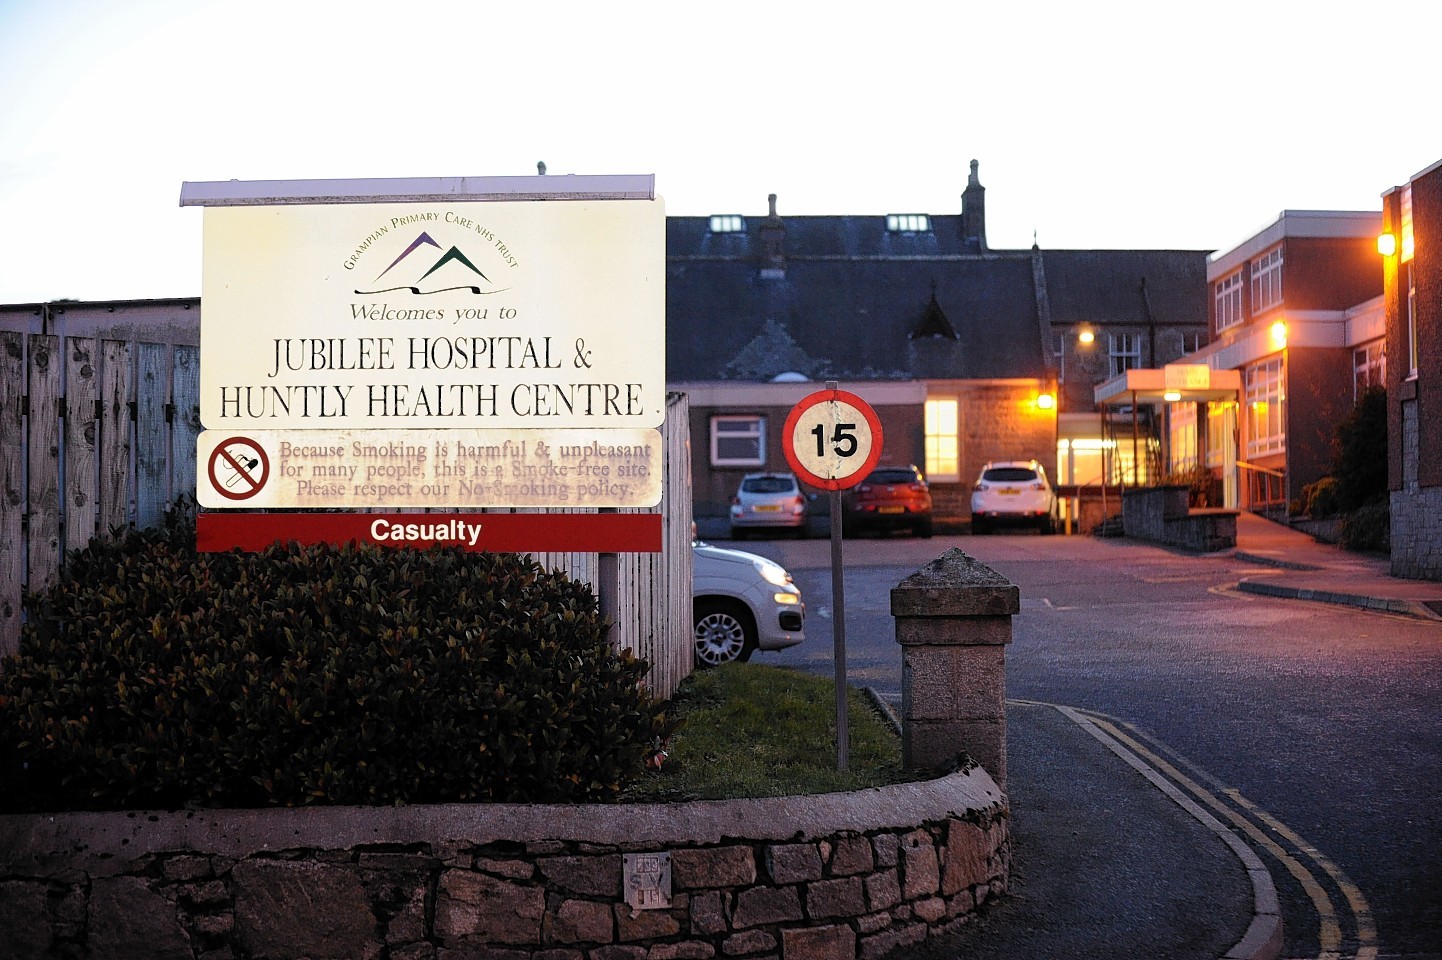 The incident happened at the Jubilee Hospital in Huntly